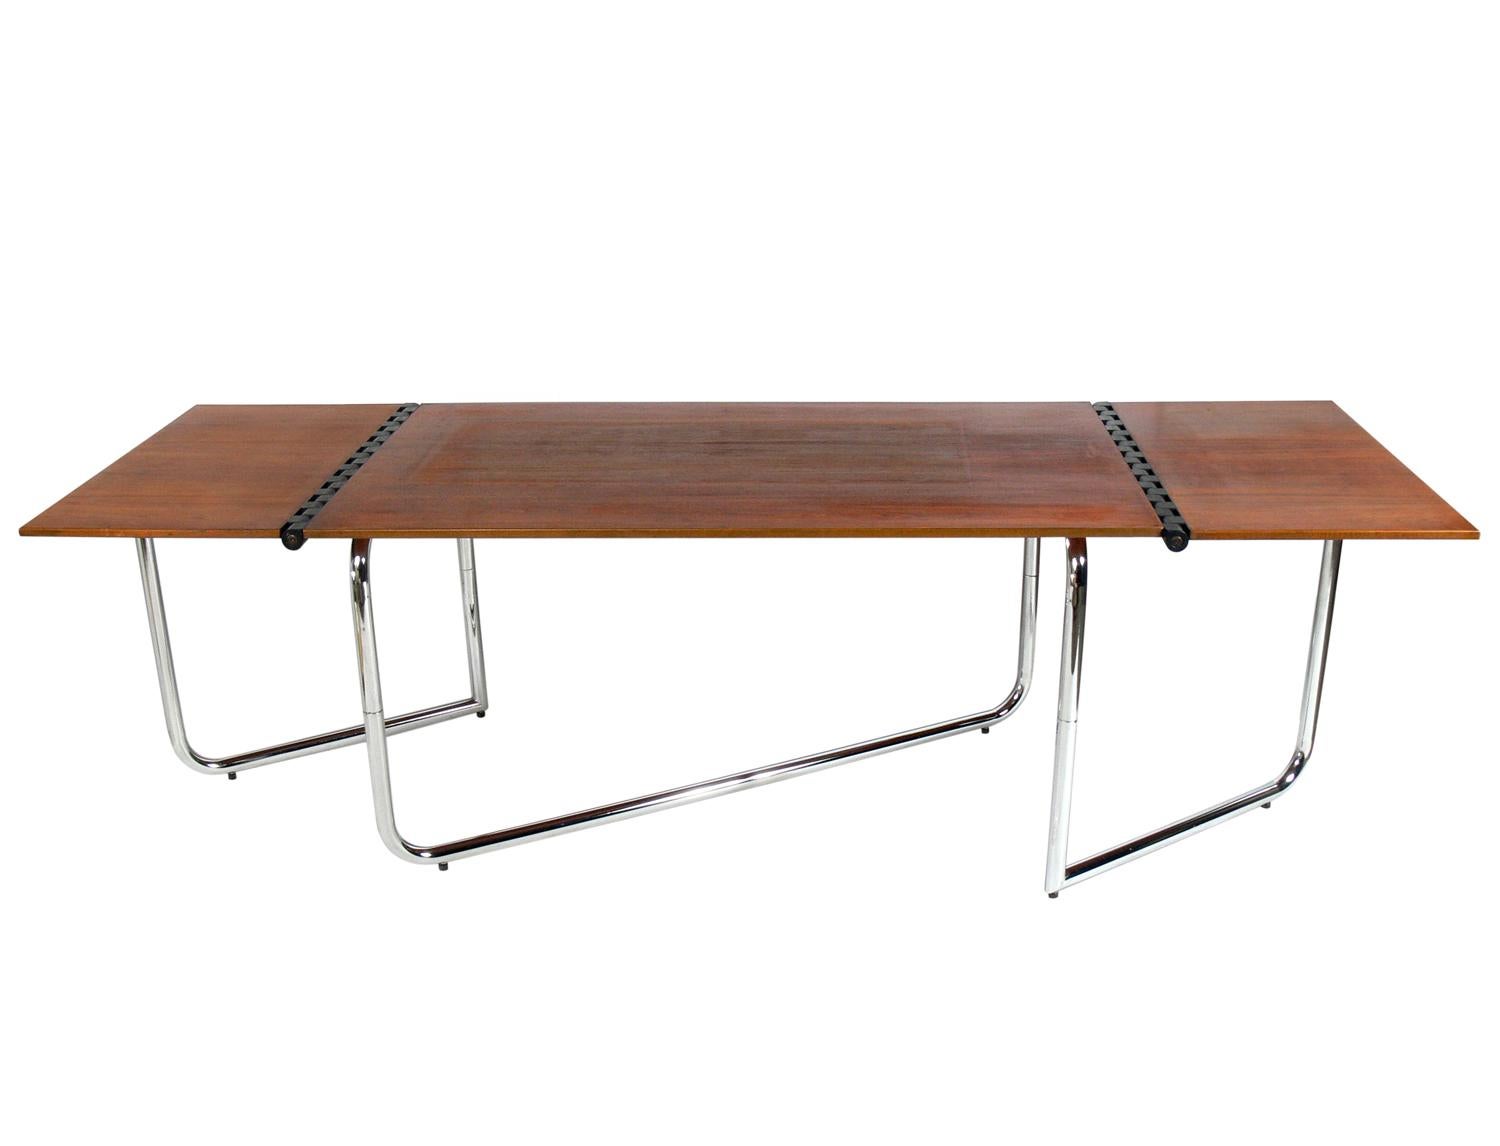 Italian drop leaf dining table or desk, Italy, circa 1970s. Interesting drop leaf joinery on either side. This would be the perfect size for an NYC apartment, as it could be used as a desk or dining table with the drop leaves down, and when fully